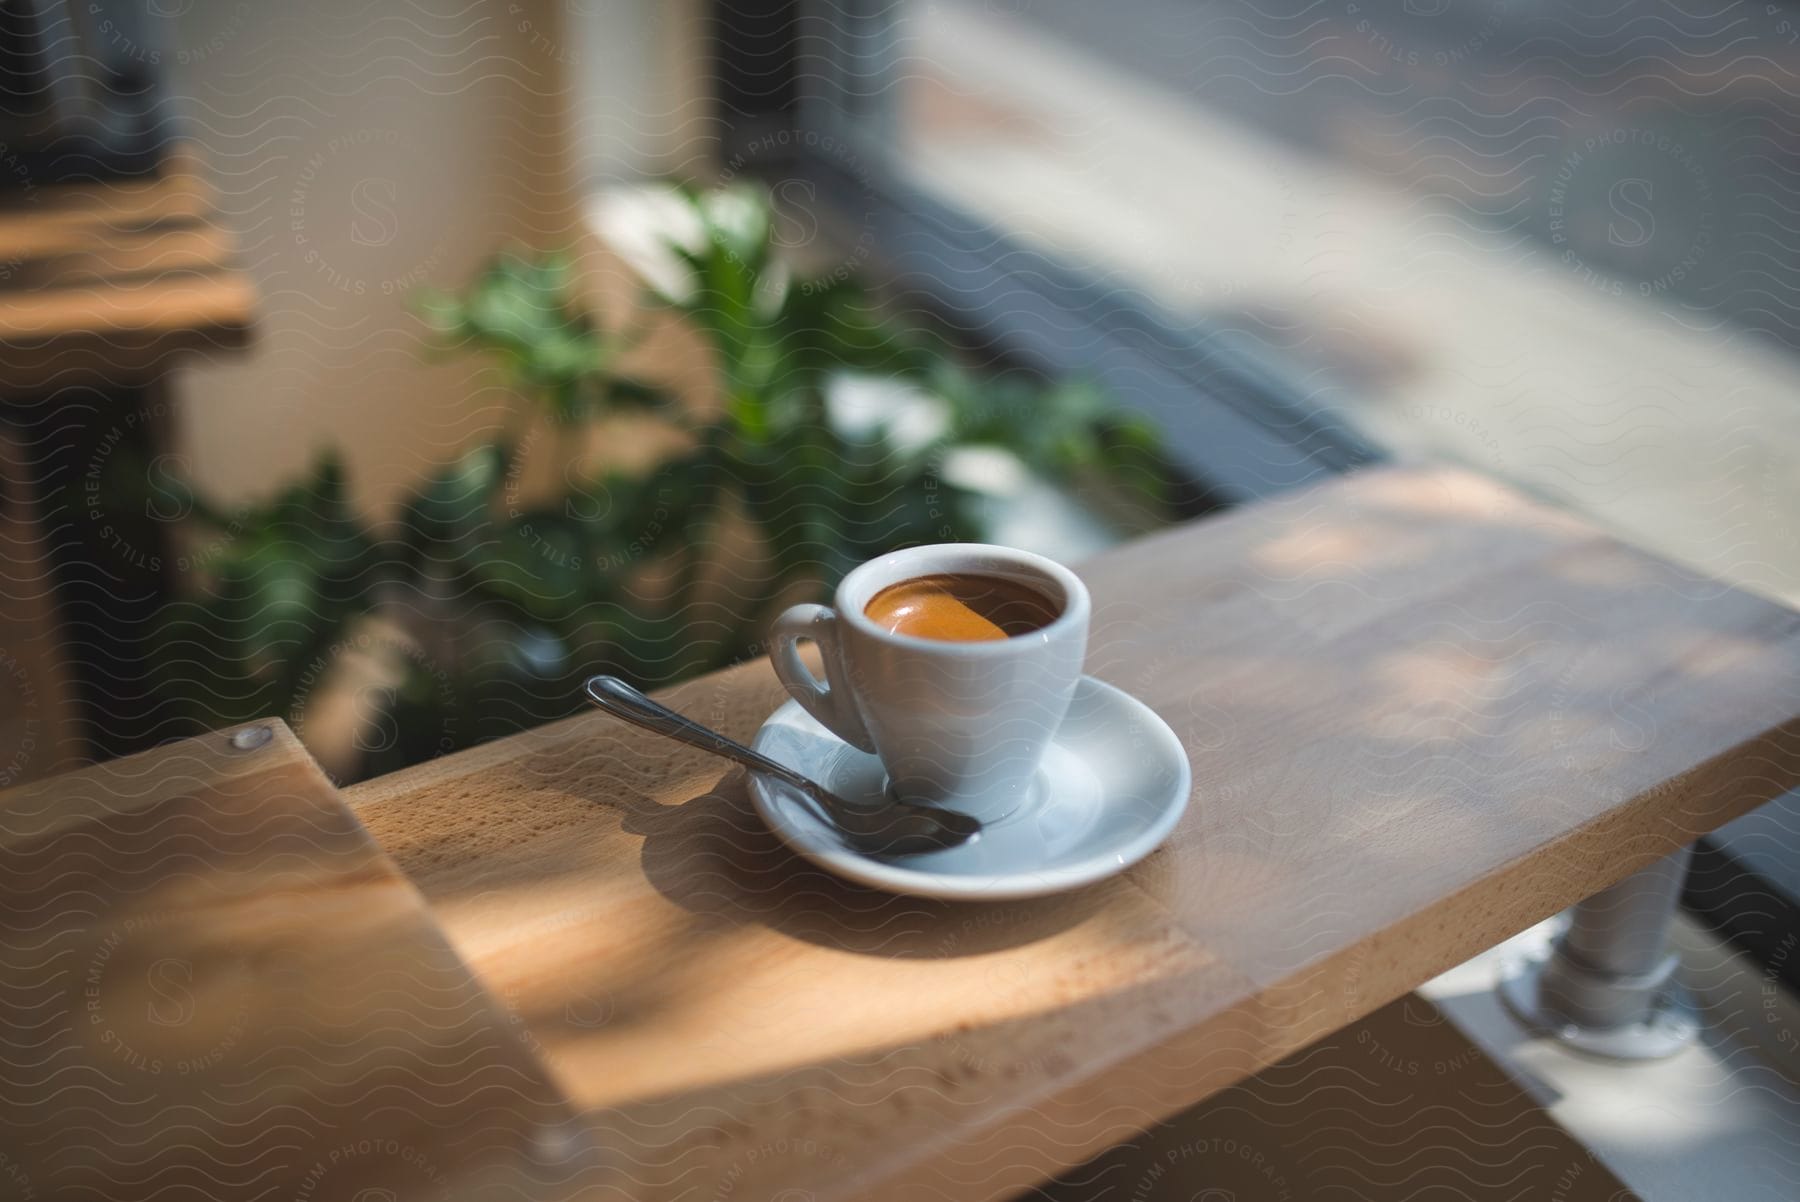 A cup of coffee with a spoon on the saucer sits on a counter near a window